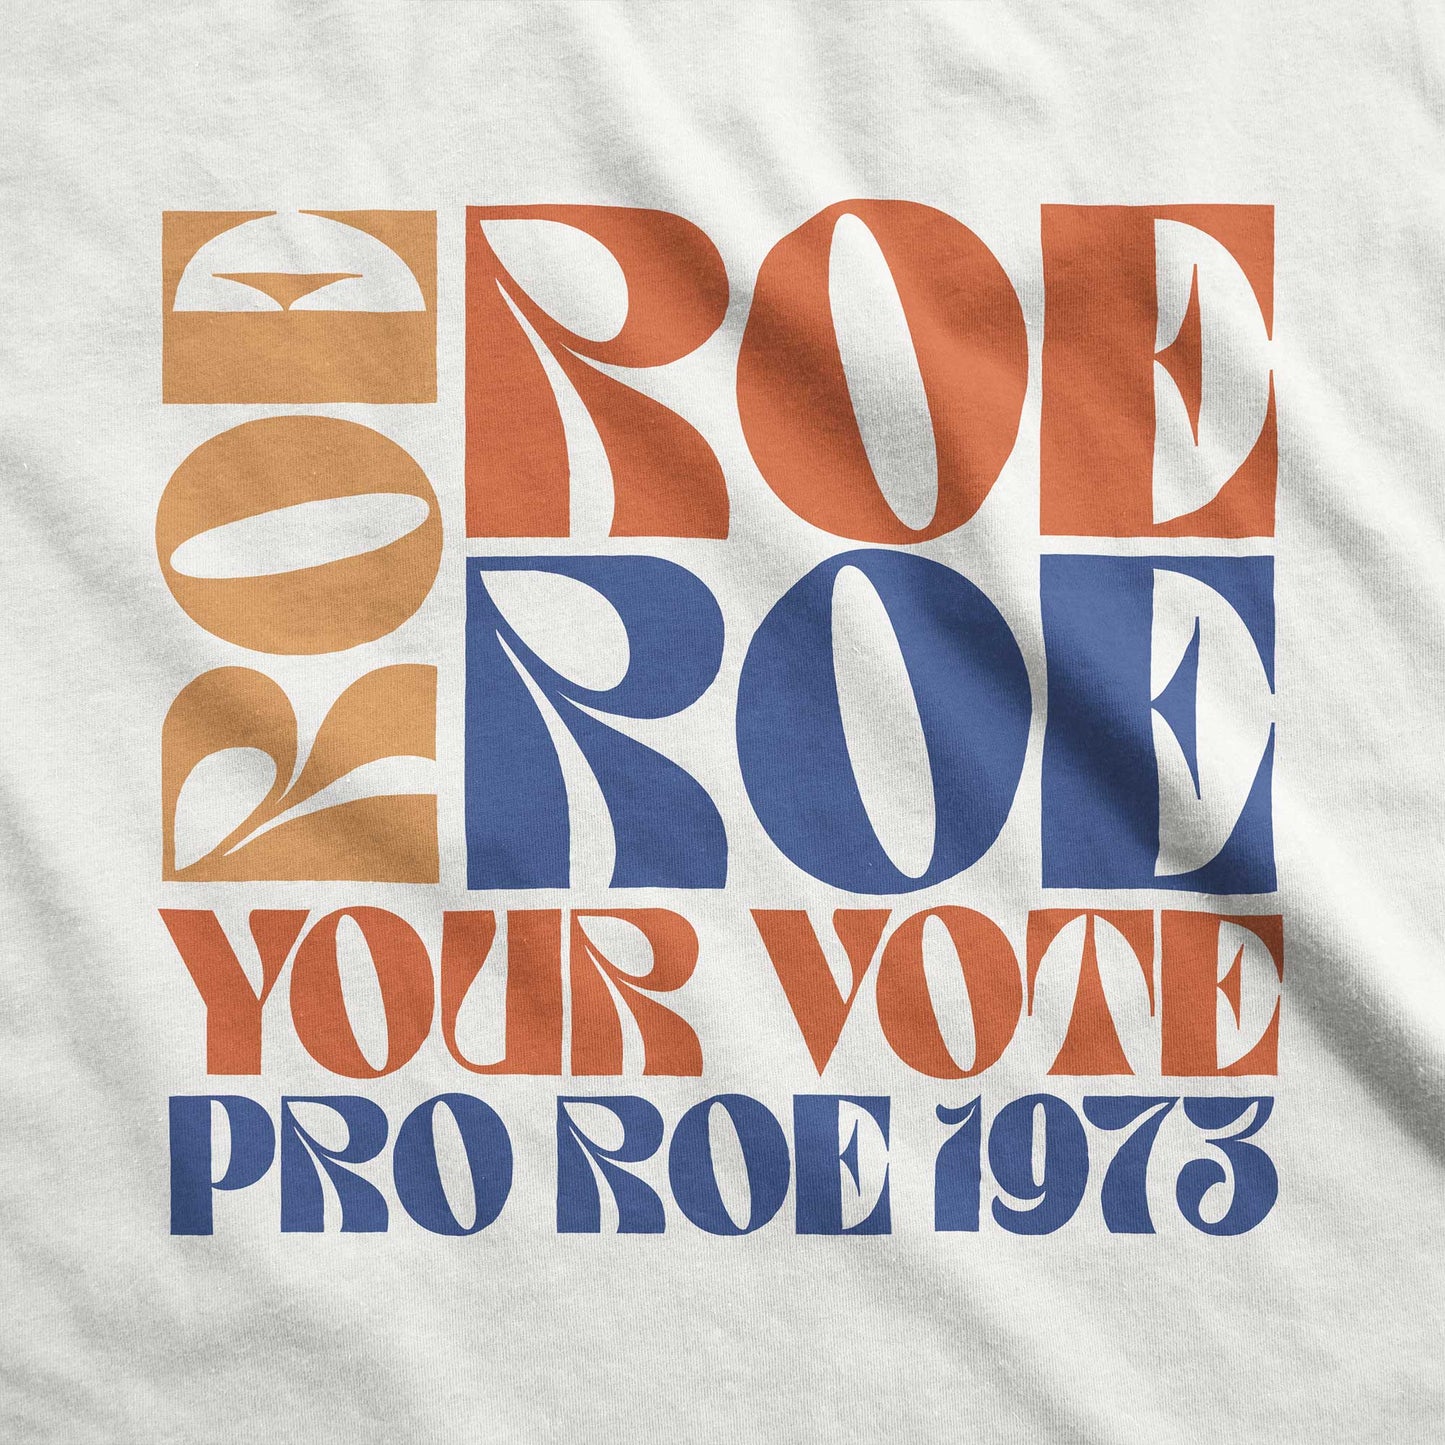 Roe Roe Roe Your Vote - Adult Unisex Jersey Crew Tee